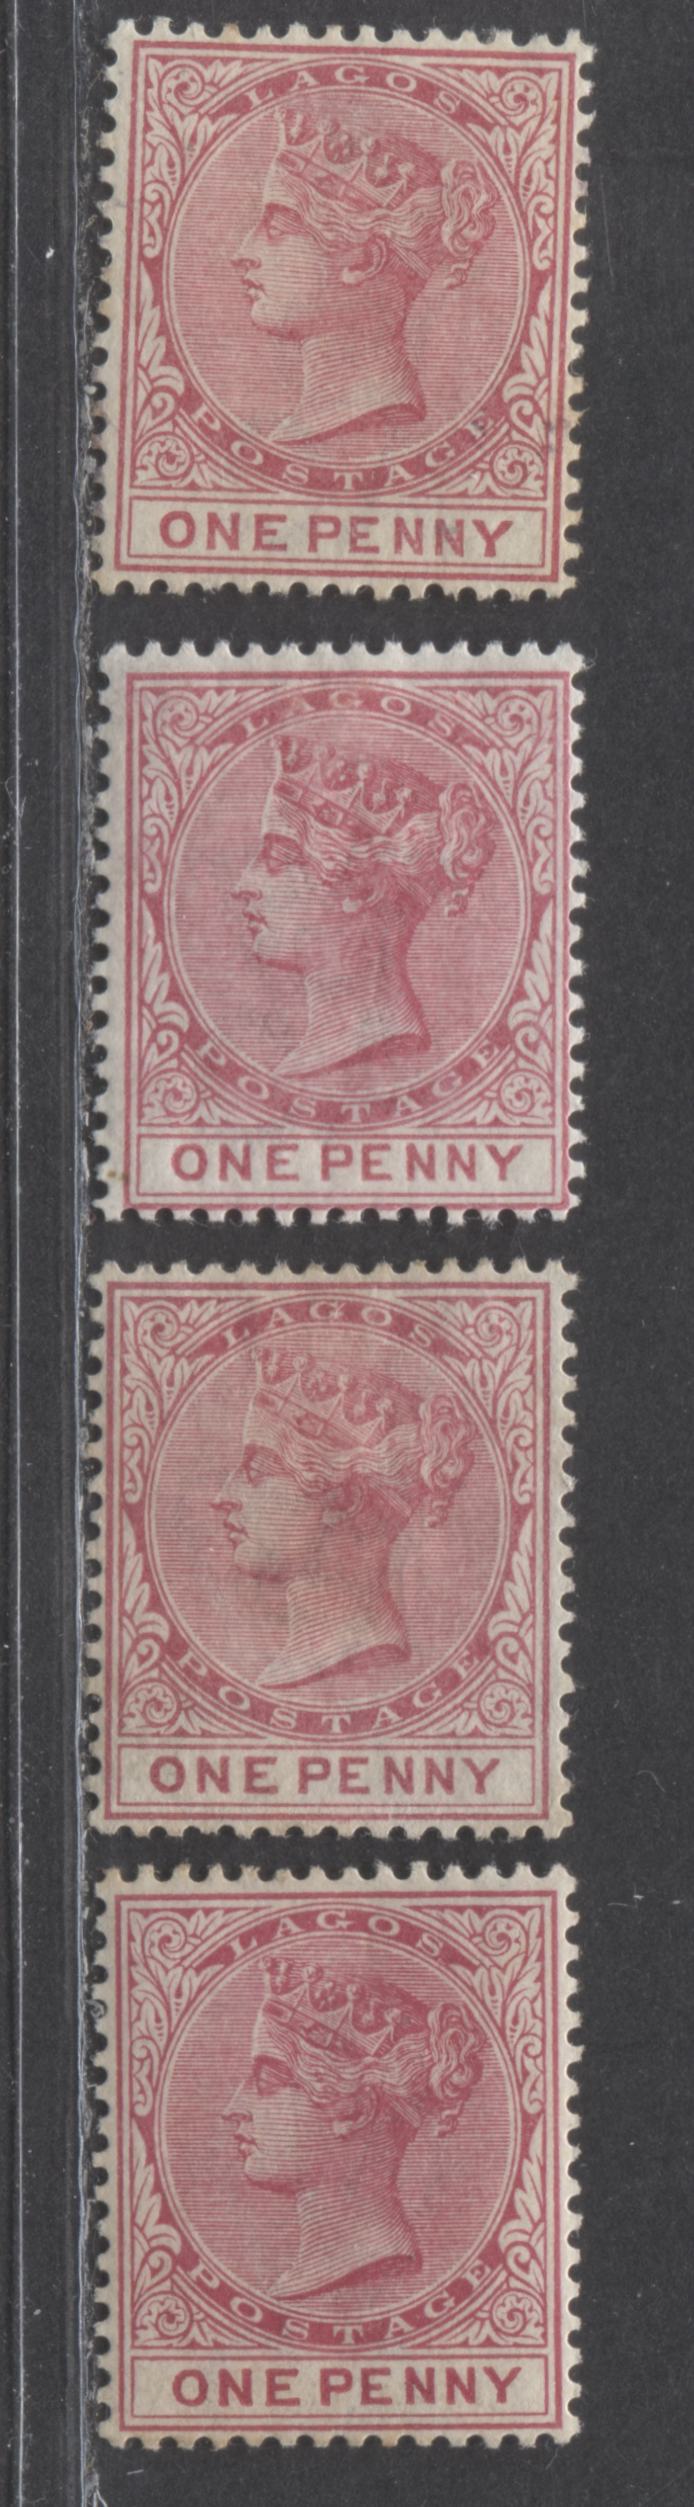 Lot 260 Lagos SG#22 (SC#15) 1d Carmine, Queen Victoria, 1884-1886 Second Crown CA Watermarked Issue, A Mint Group of Four Early Printings, Likely Pre-1886, 2022 Scott Classic Cat. $9 For the Commonest Printings, Est. $20